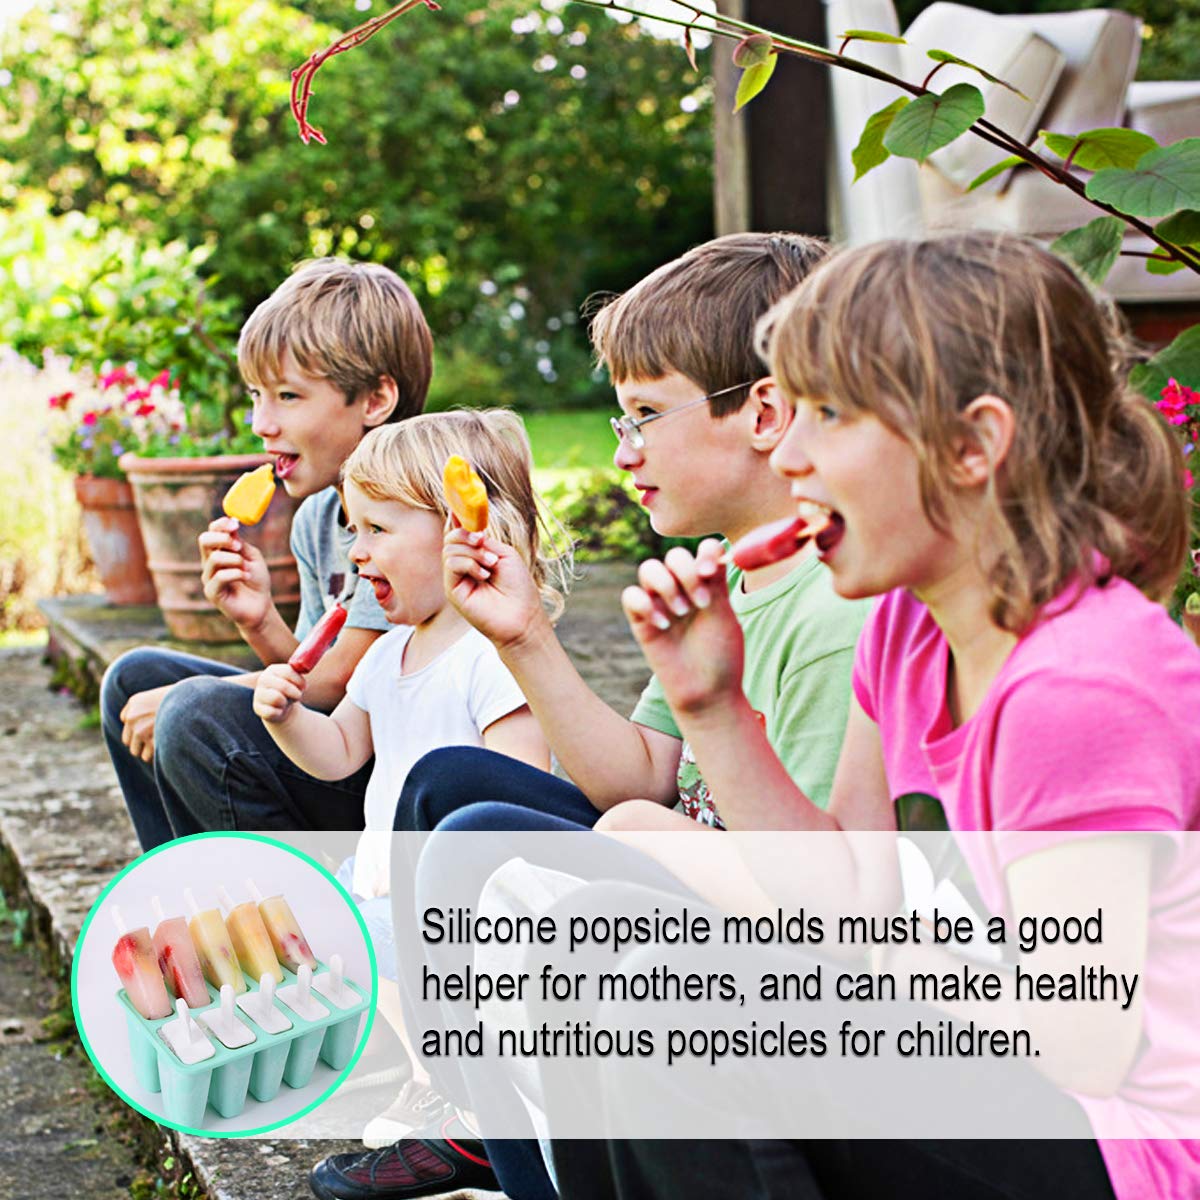 YSBER Popsicle Molds -10 Pieces Easy Release - Reusable BPA Free Silicone Ice Pop Molds Maker With Silicone Funnel & Cleaning Brush.